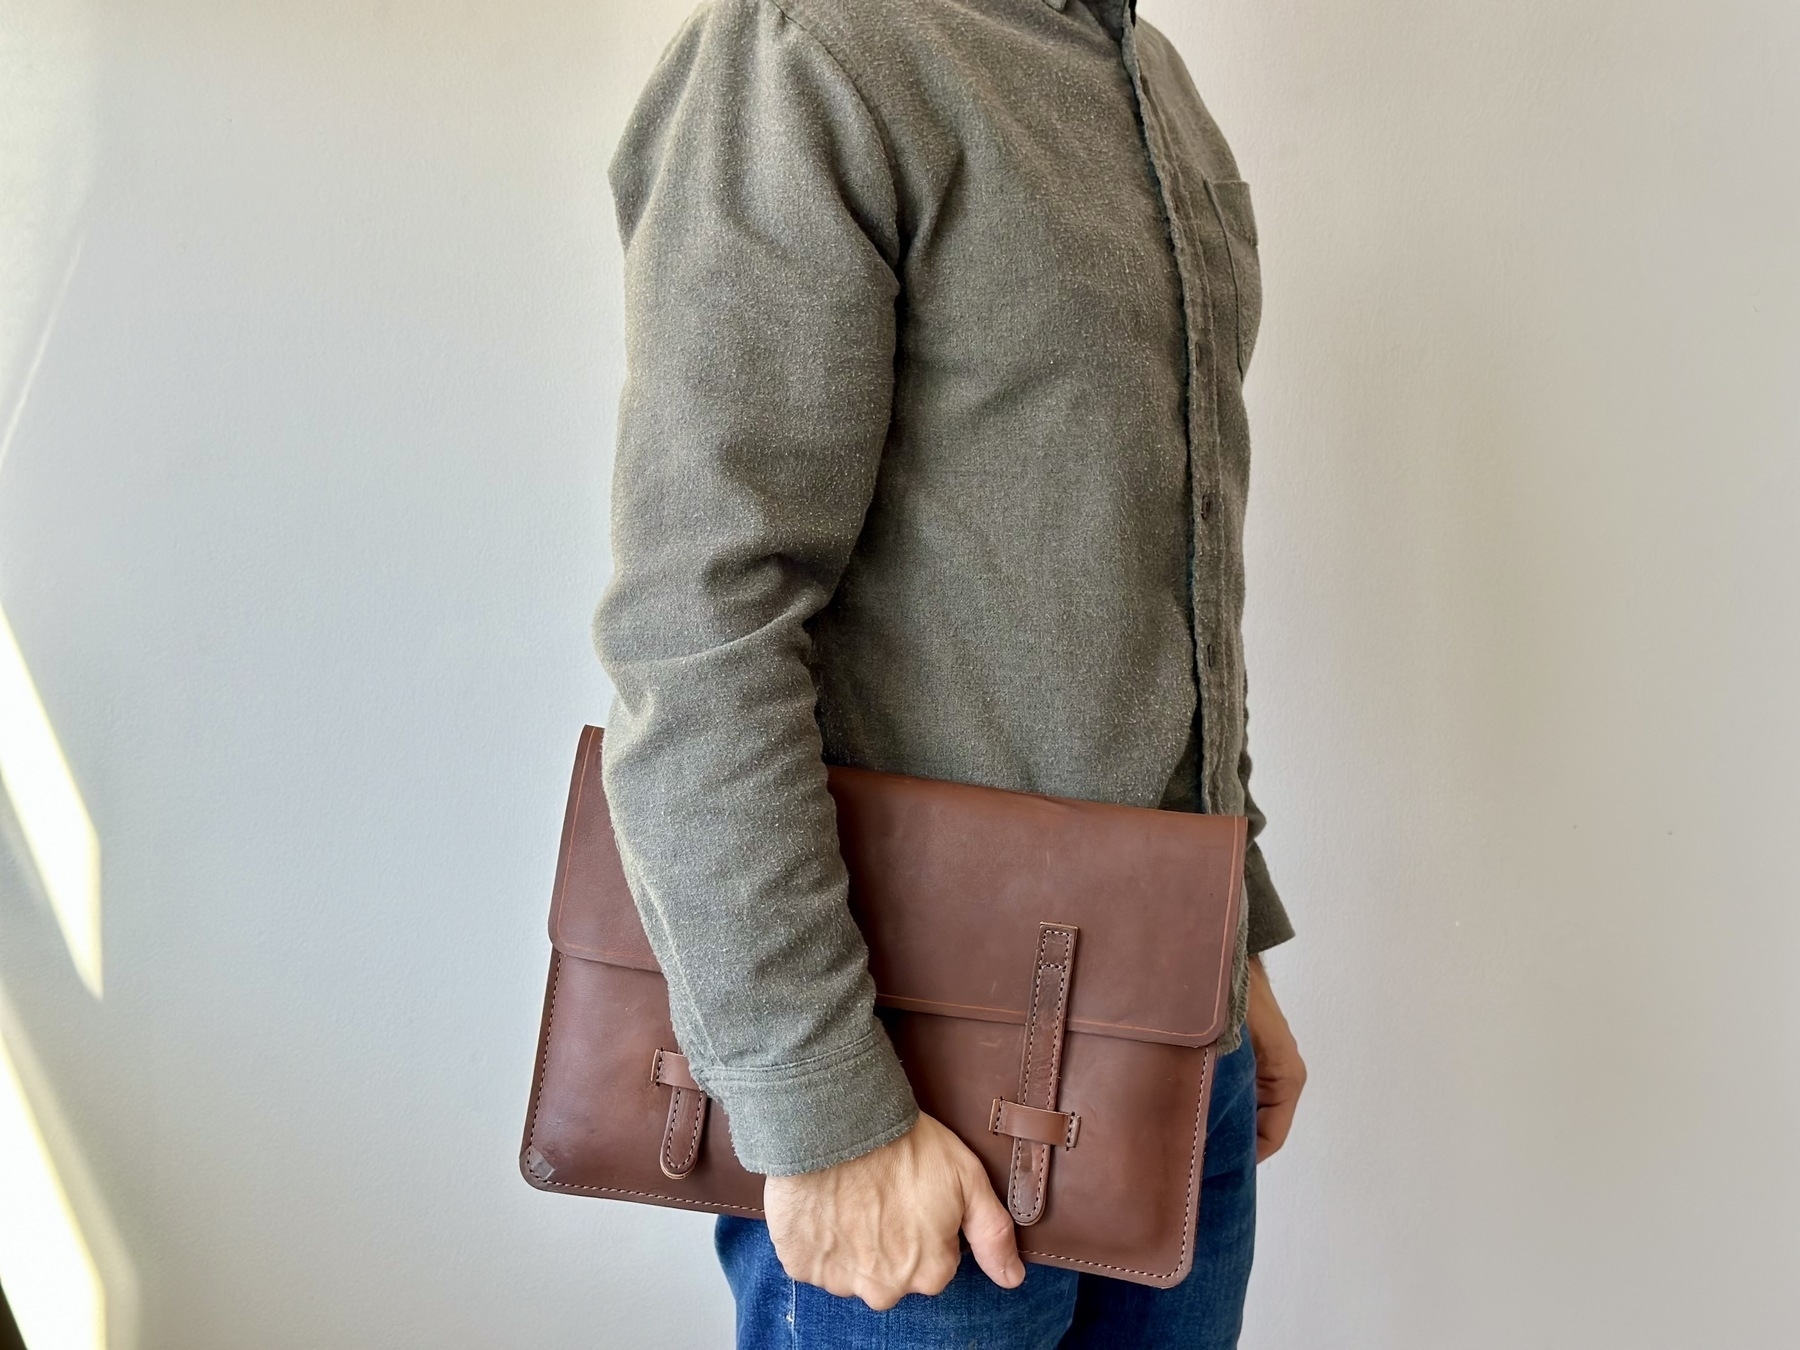 Brown leather laptop sleeve being held in one hand by the waist